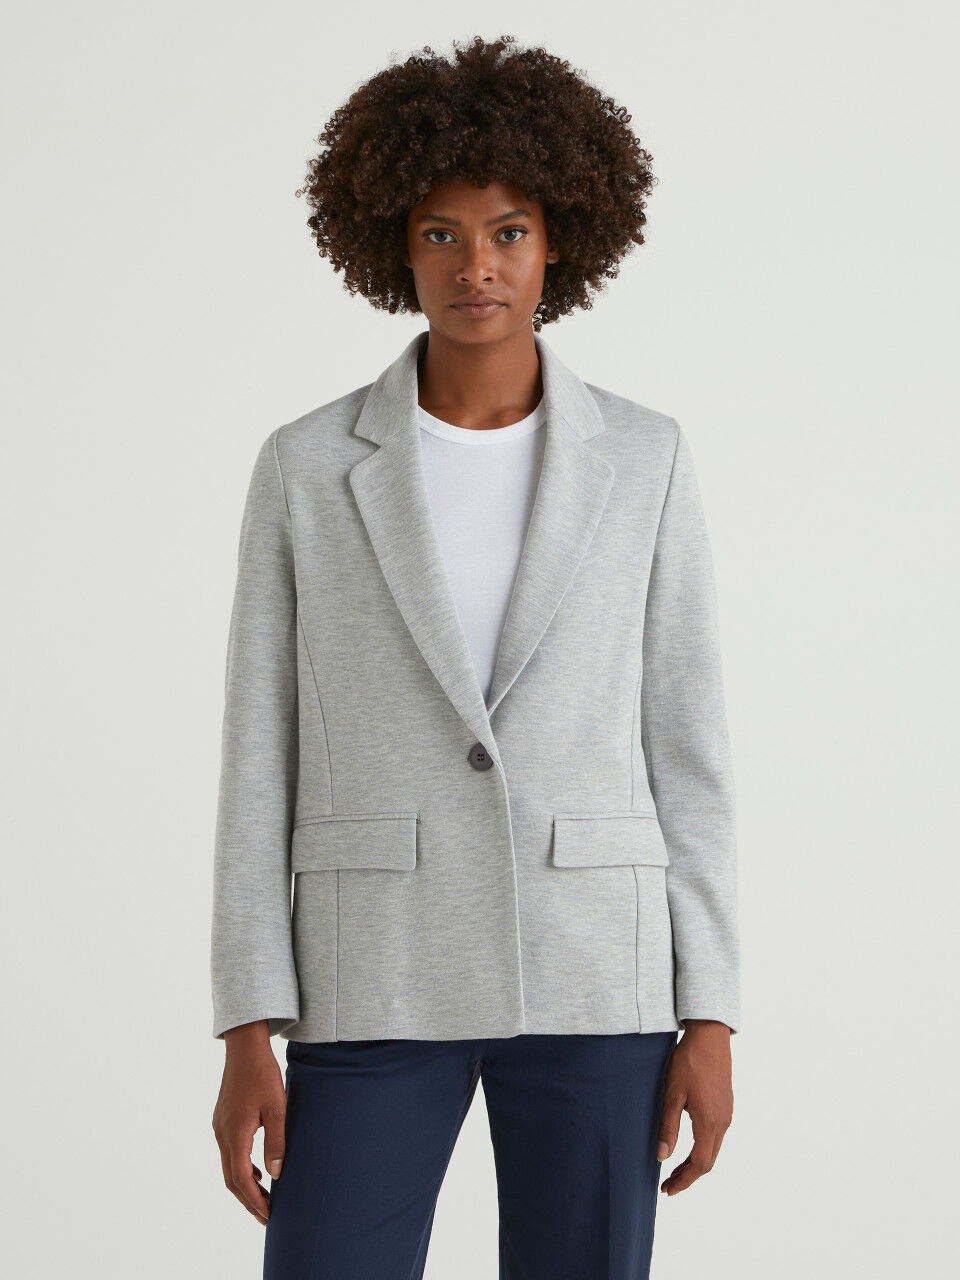 Women's Jackets and Coats Collection 2022 | Benetton